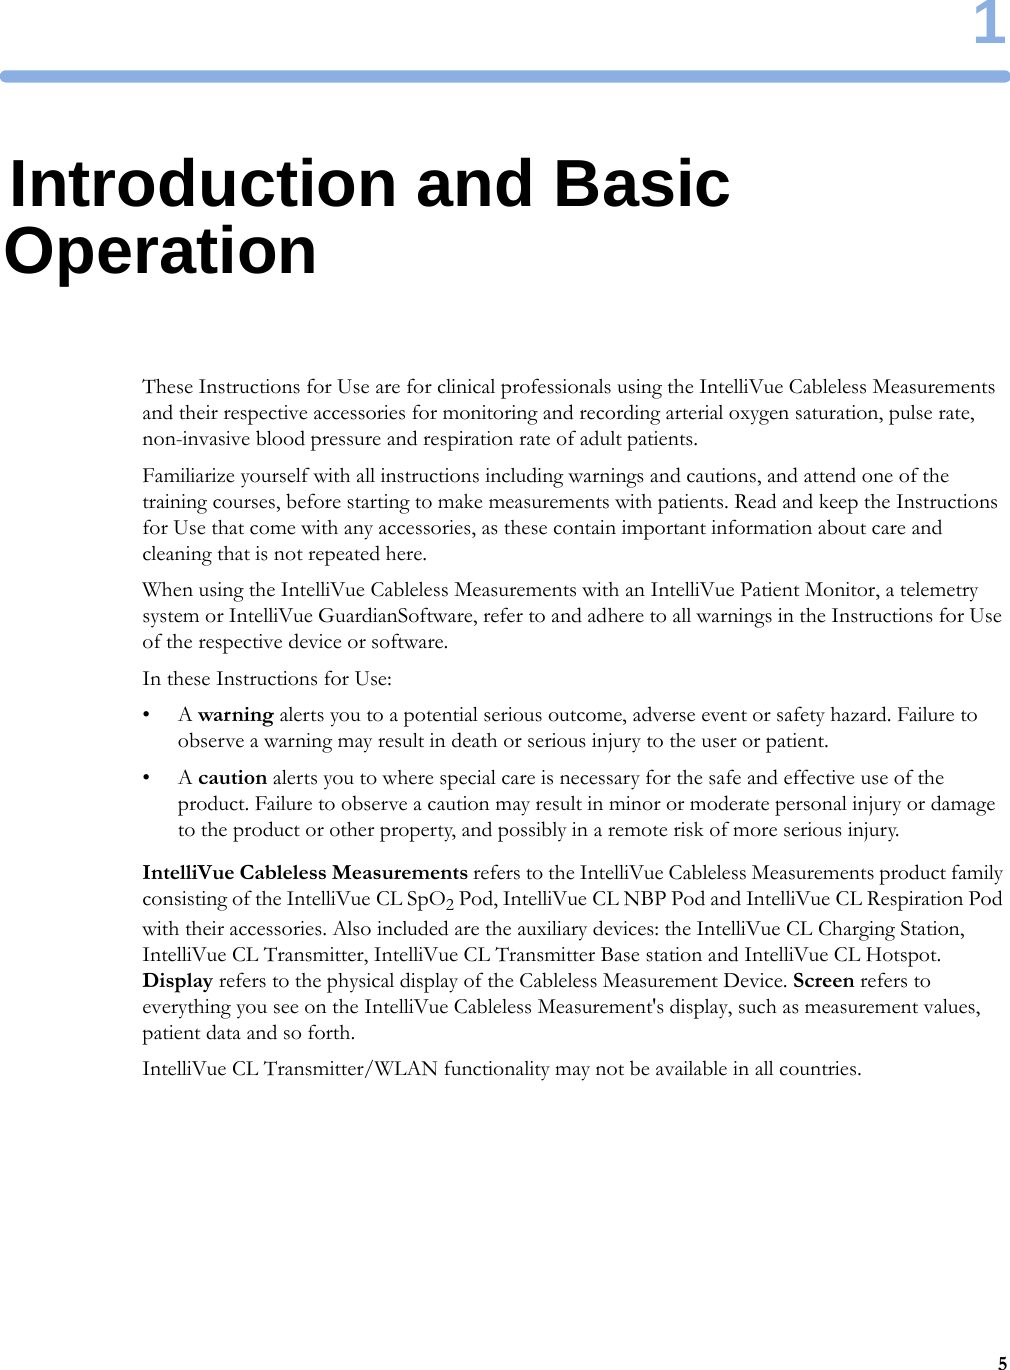 151Introduction and Basic OperationThese Instructions for Use are for clinical professionals using the IntelliVue Cableless Measurements and their respective accessories for monitoring and recording arterial oxygen saturation, pulse rate, non-invasive blood pressure and respiration rate of adult patients.Familiarize yourself with all instructions including warnings and cautions, and attend one of the training courses, before starting to make measurements with patients. Read and keep the Instructions for Use that come with any accessories, as these contain important information about care and cleaning that is not repeated here.When using the IntelliVue Cableless Measurements with an IntelliVue Patient Monitor, a telemetry system or IntelliVue GuardianSoftware, refer to and adhere to all warnings in the Instructions for Use of the respective device or software.In these Instructions for Use:•A warning alerts you to a potential serious outcome, adverse event or safety hazard. Failure to observe a warning may result in death or serious injury to the user or patient.•A caution alerts you to where special care is necessary for the safe and effective use of the product. Failure to observe a caution may result in minor or moderate personal injury or damage to the product or other property, and possibly in a remote risk of more serious injury.IntelliVue Cableless Measurements refers to the IntelliVue Cableless Measurements product family consisting of the IntelliVue CL SpO2 Pod, IntelliVue CL NBP Pod and IntelliVue CL Respiration Pod with their accessories. Also included are the auxiliary devices: the IntelliVue CL Charging Station, IntelliVue CL Transmitter, IntelliVue CL Transmitter Base station and IntelliVue CL Hotspot. Display refers to the physical display of the Cableless Measurement Device. Screen refers to everything you see on the IntelliVue Cableless Measurement&apos;s display, such as measurement values, patient data and so forth.IntelliVue CL Transmitter/WLAN functionality may not be available in all countries.